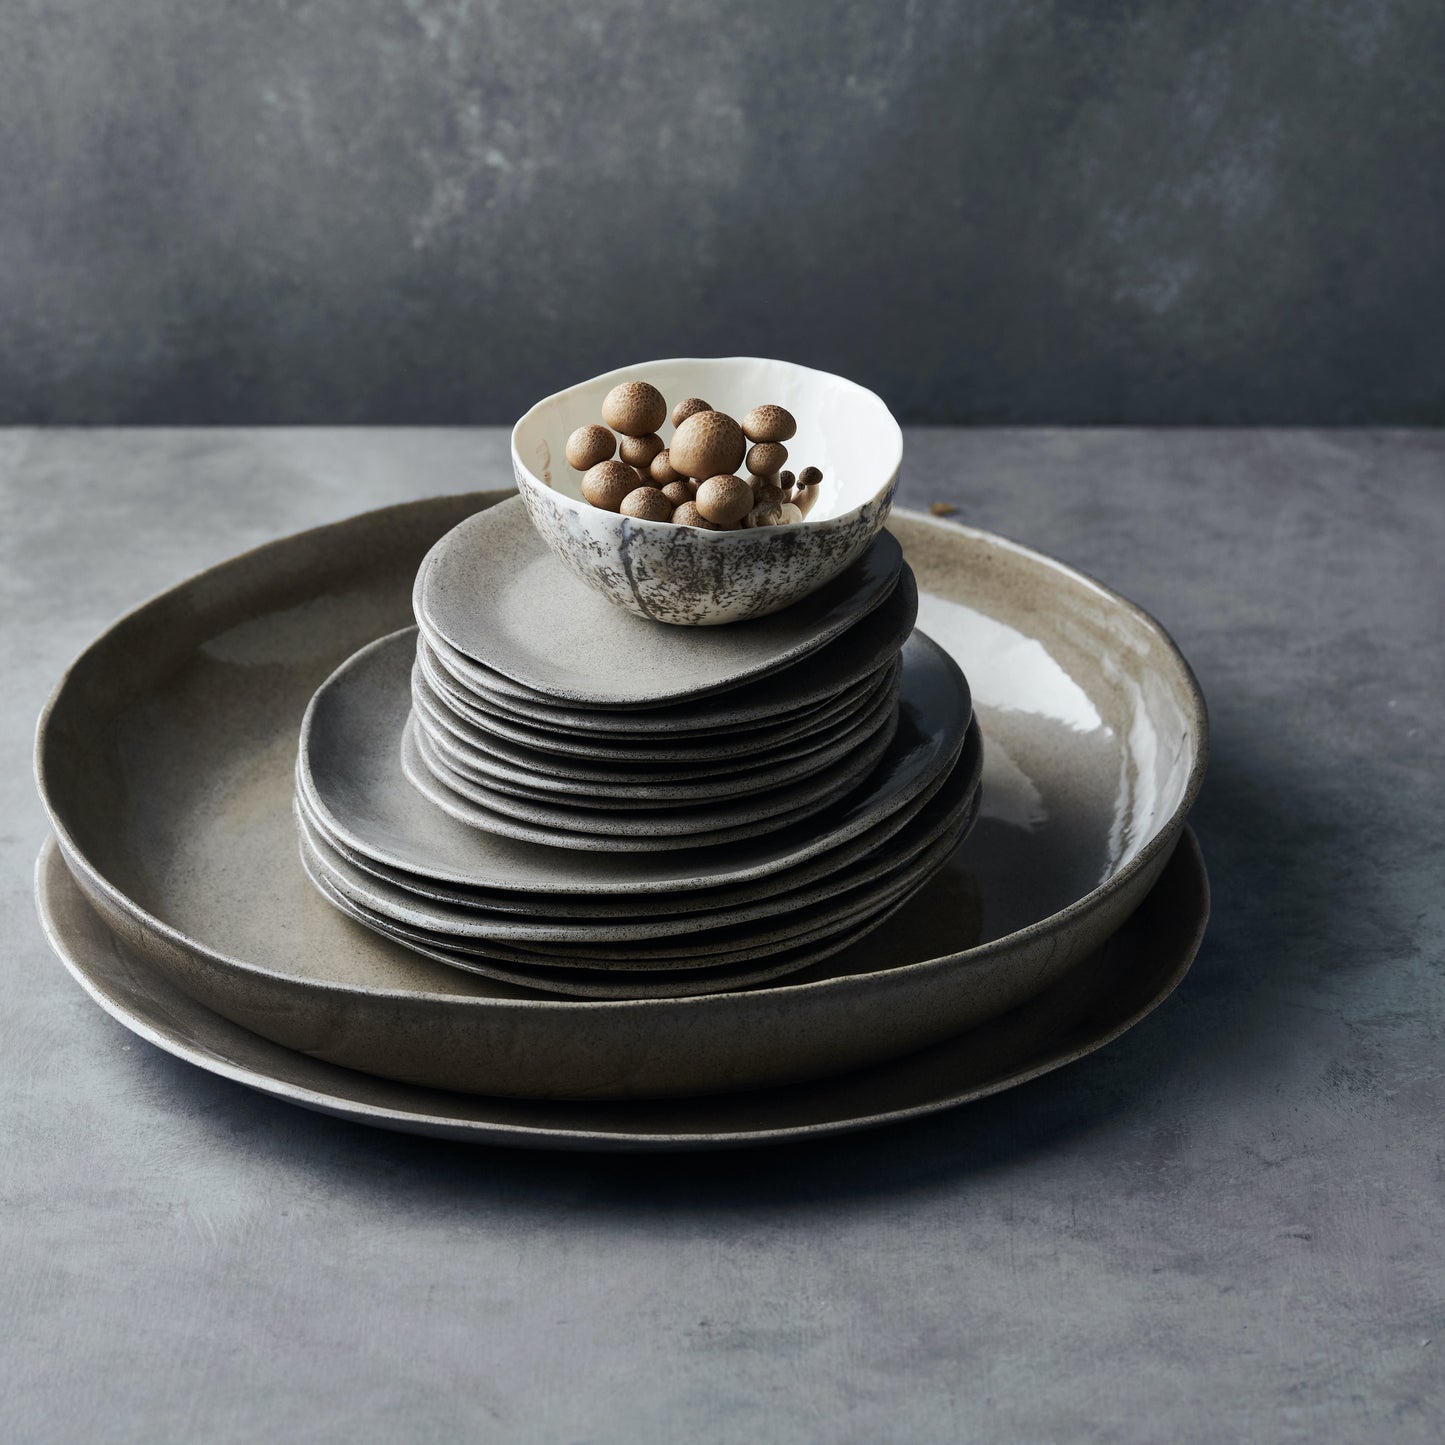 Serving plate XL Roots grey